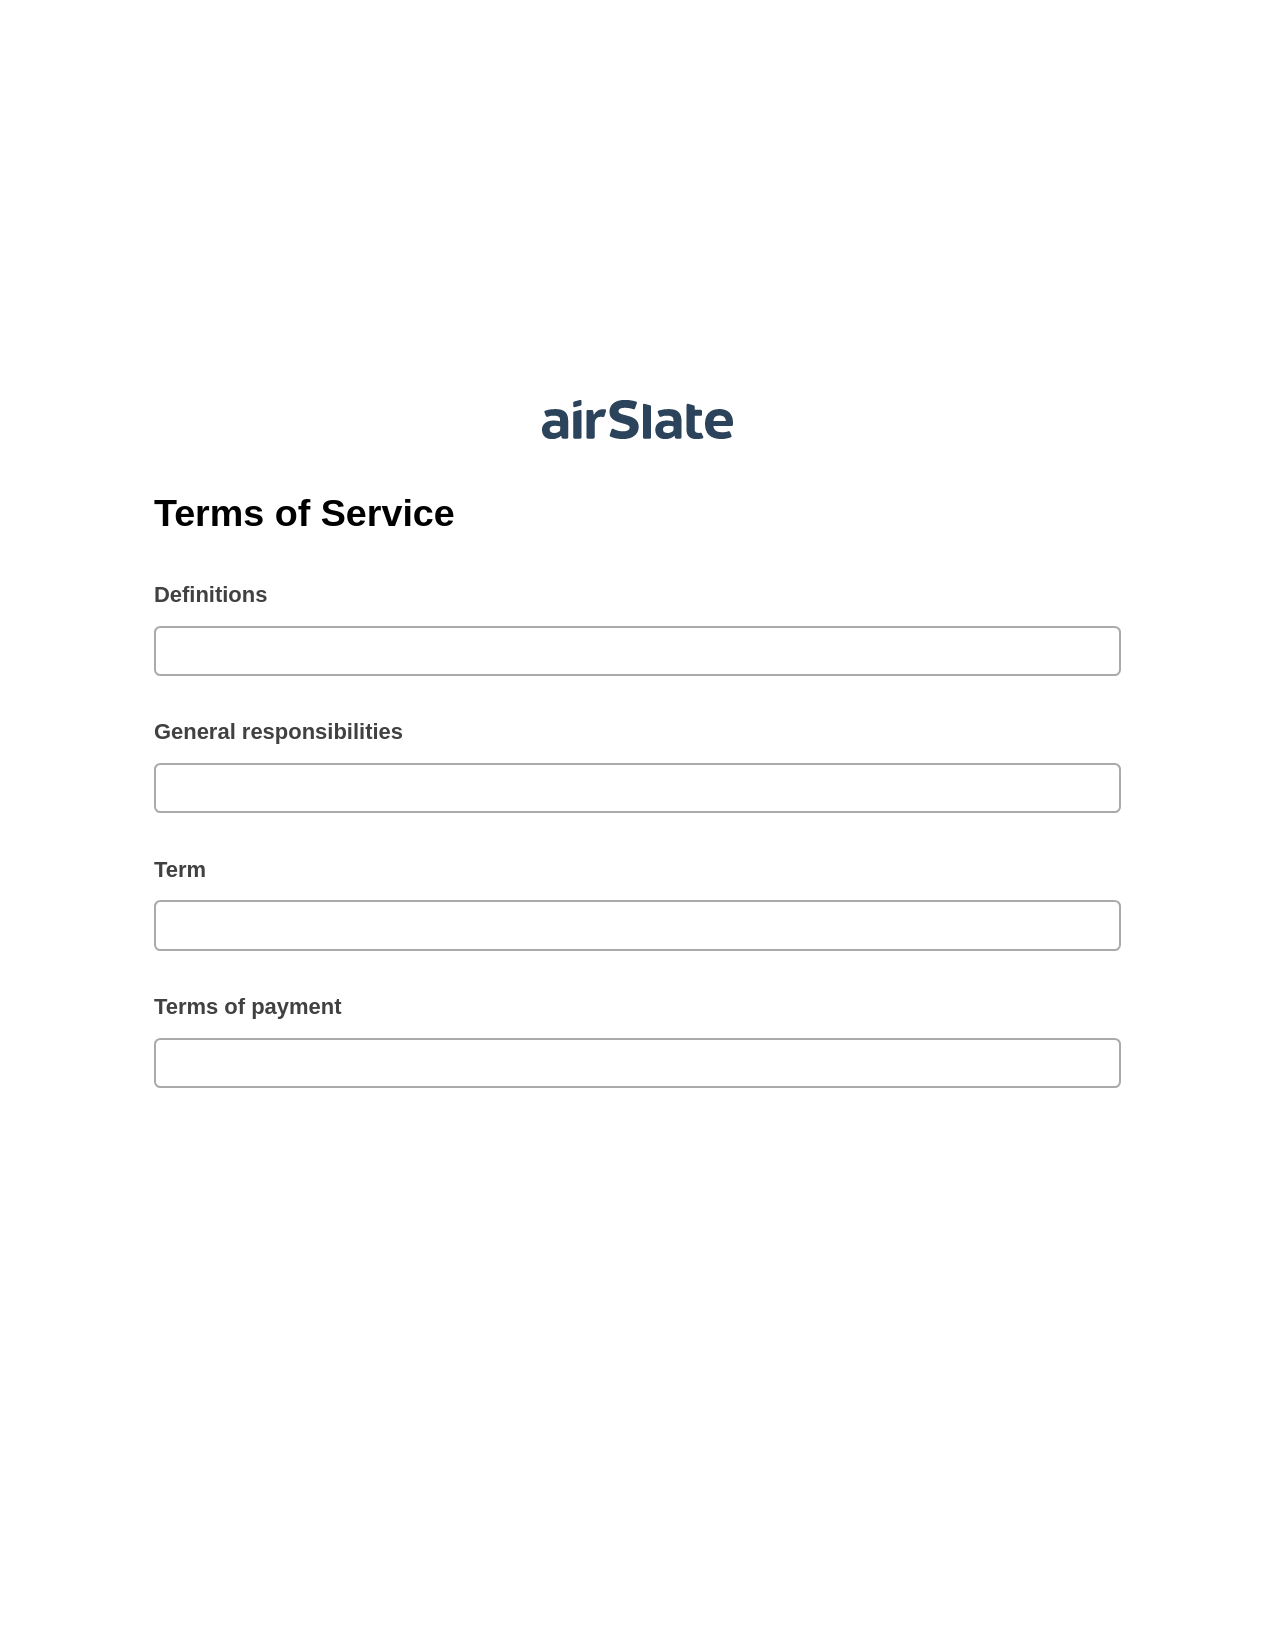 Terms of Service Pre-fill Dropdown from Airtable, Invoke Salesforce Process Bot, Export to Google Sheet Bot